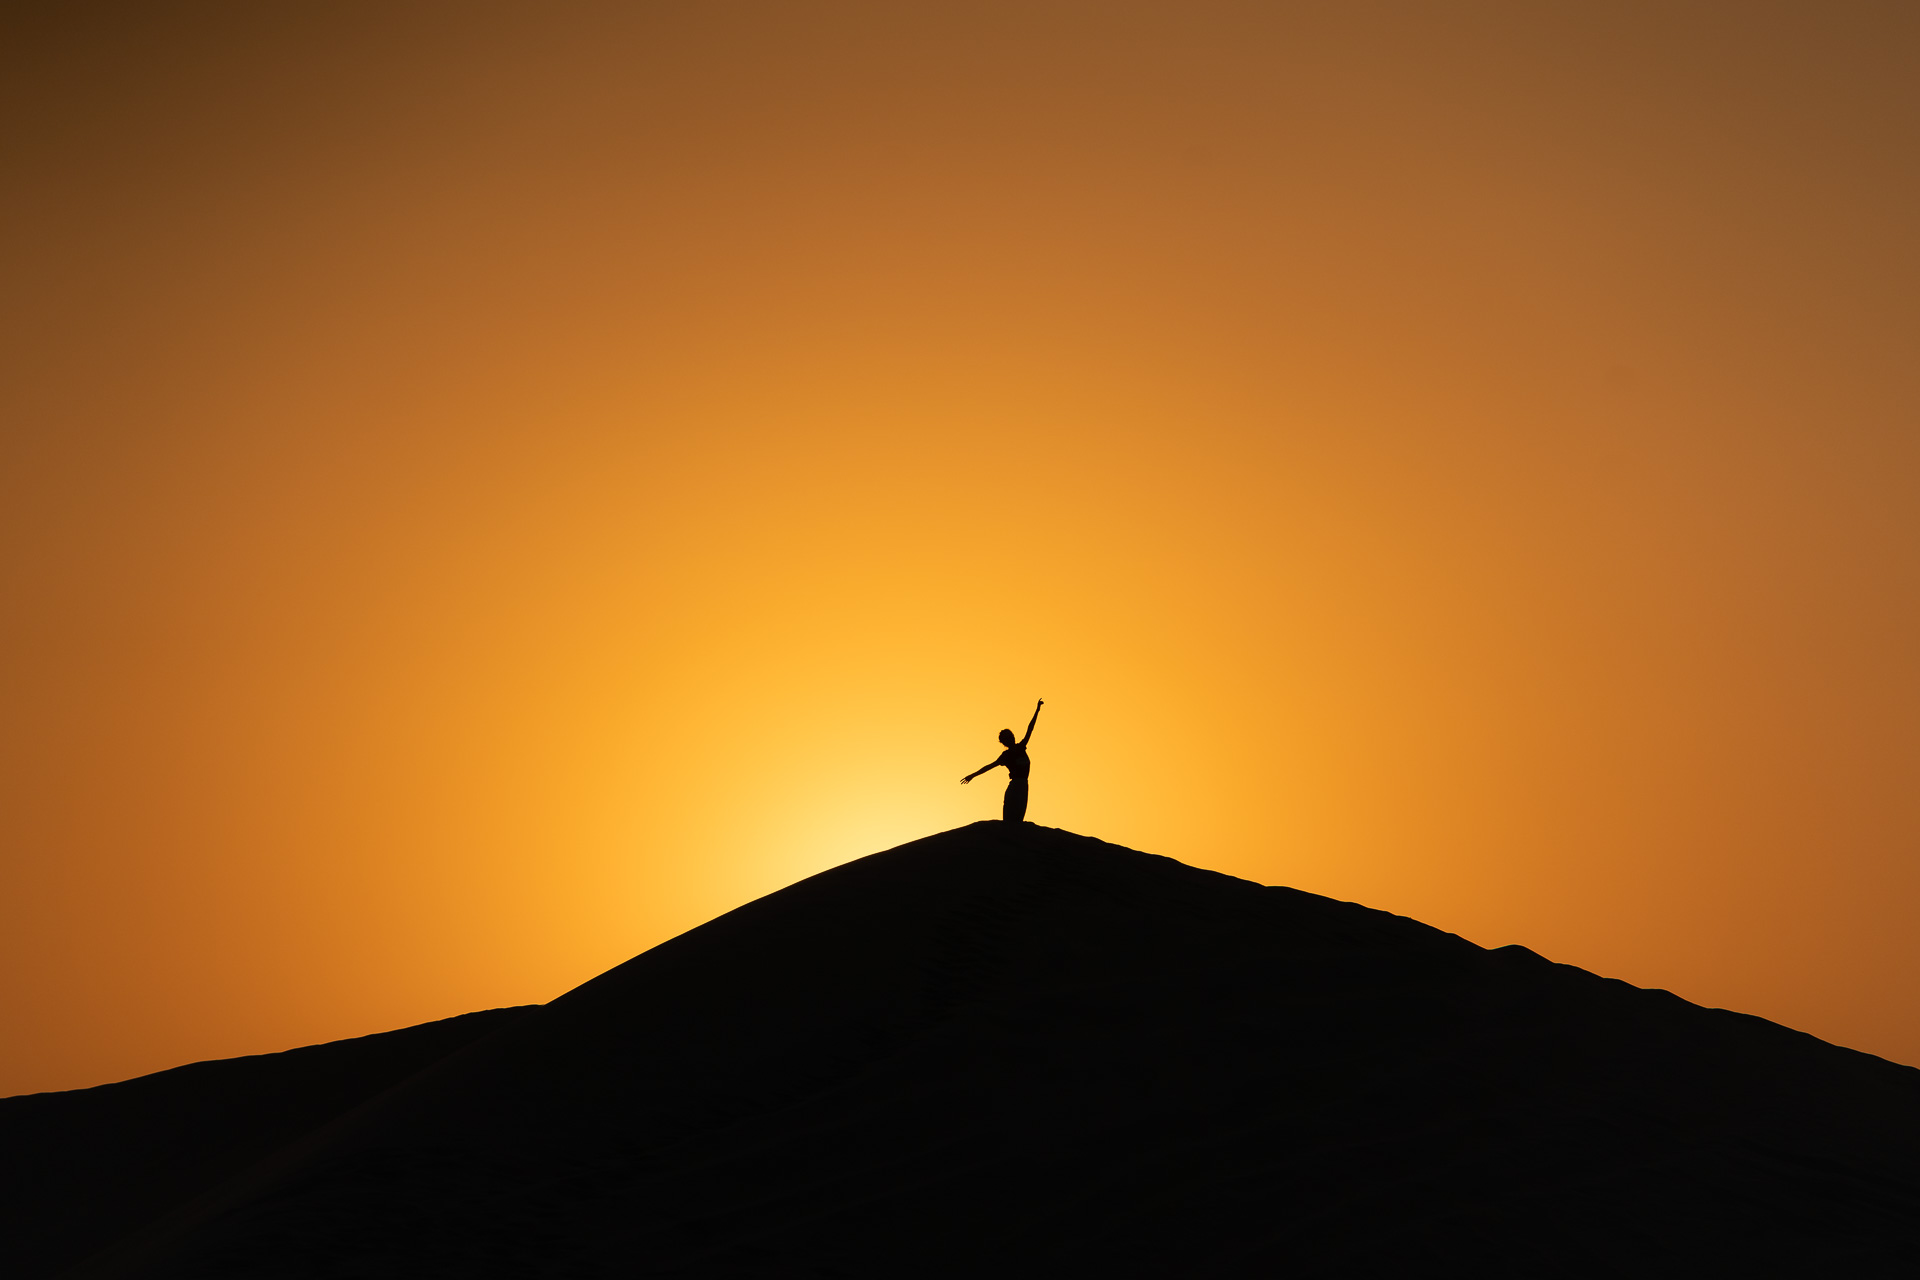 Sunset silhouette in a dune in Qatar